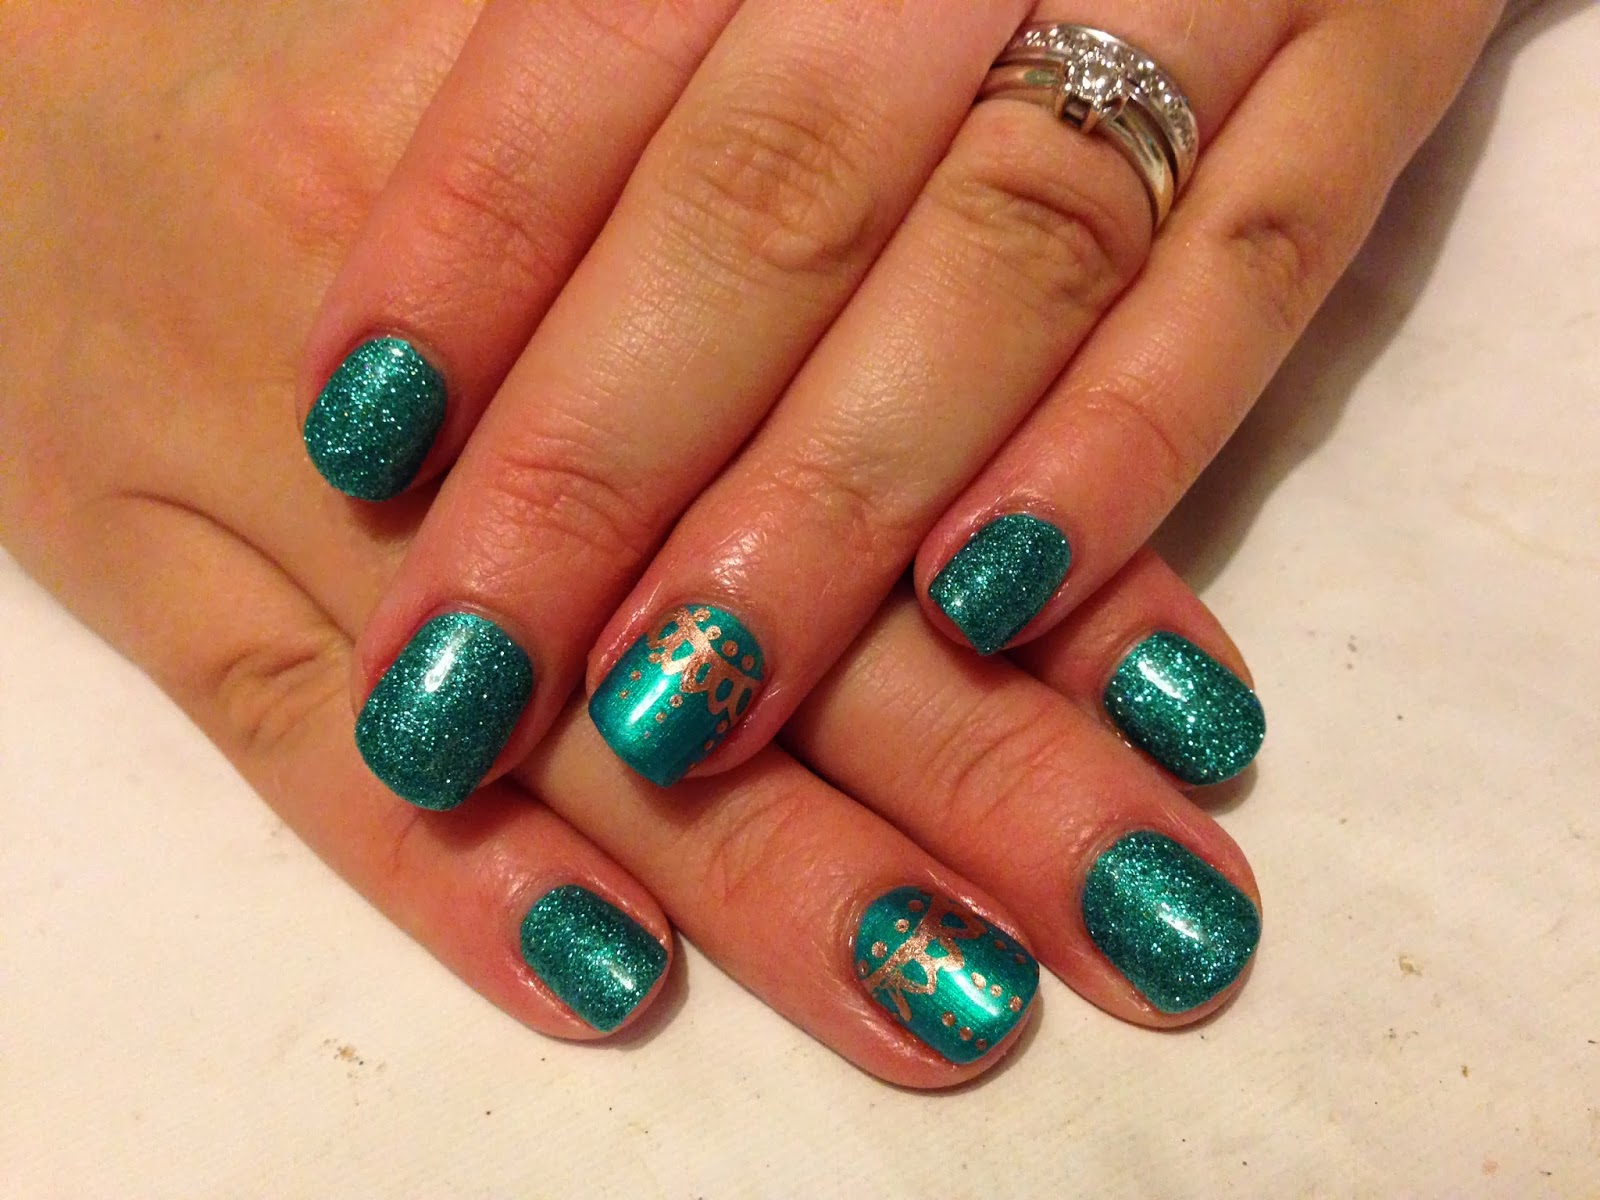 Green Shellac Nail Designs for Christmas - wide 7